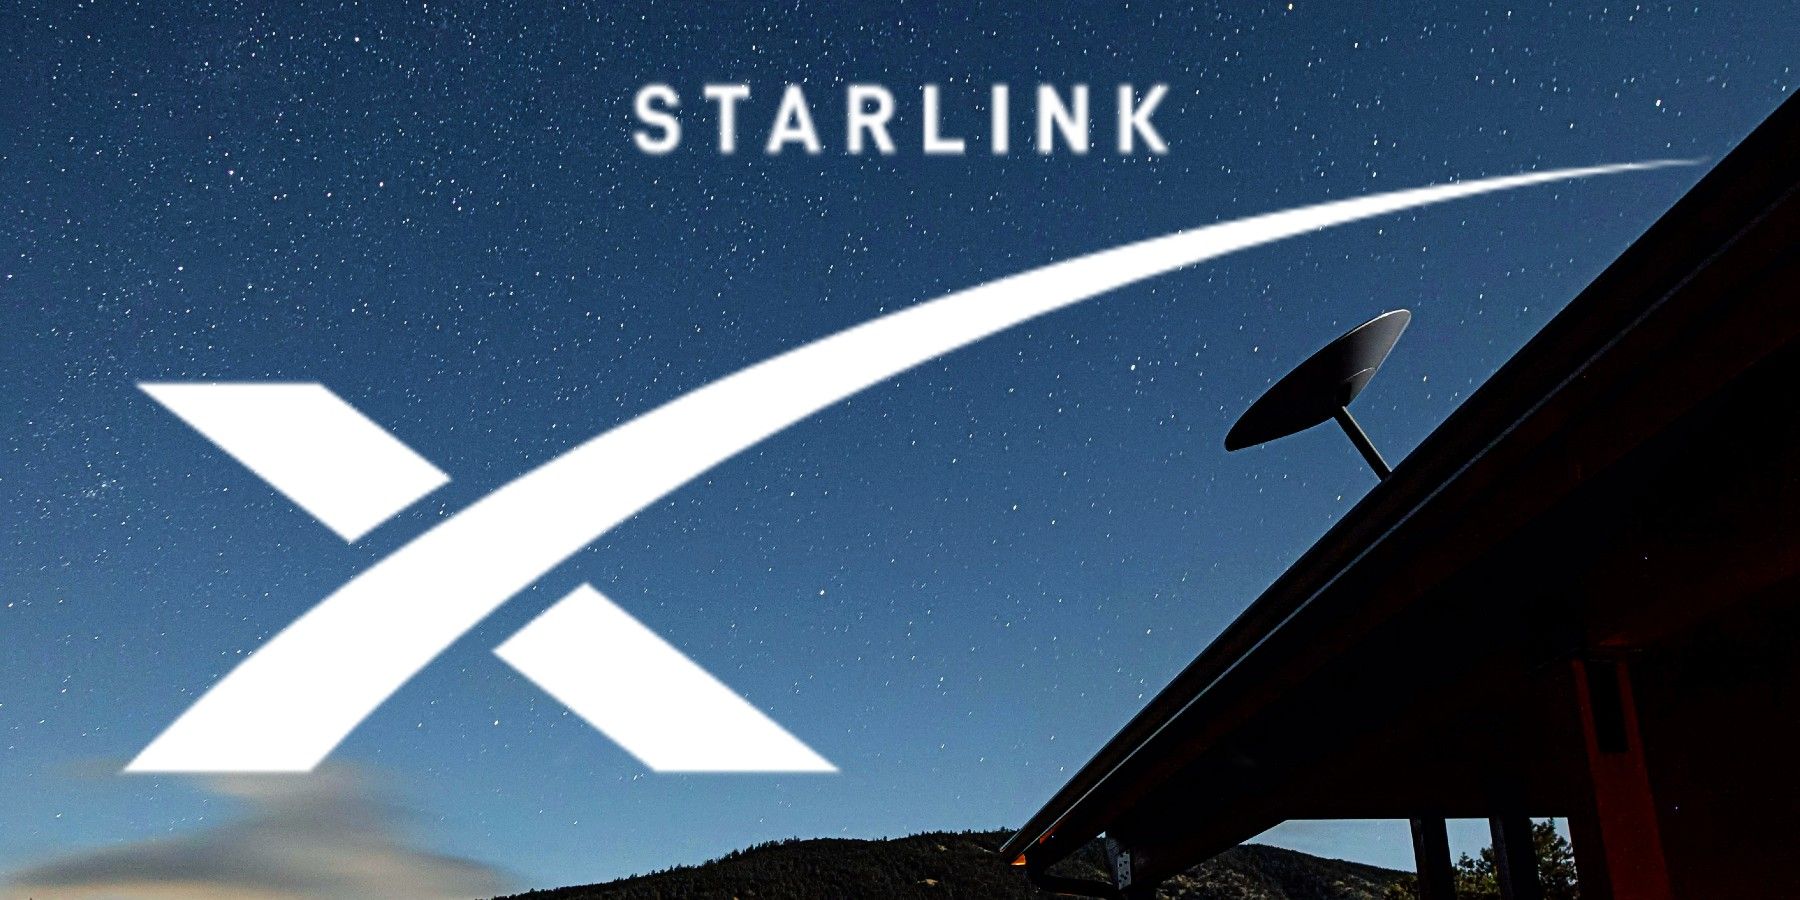 Starlink’s ‘Portability’ Add-On Lets You Take The Internet With You